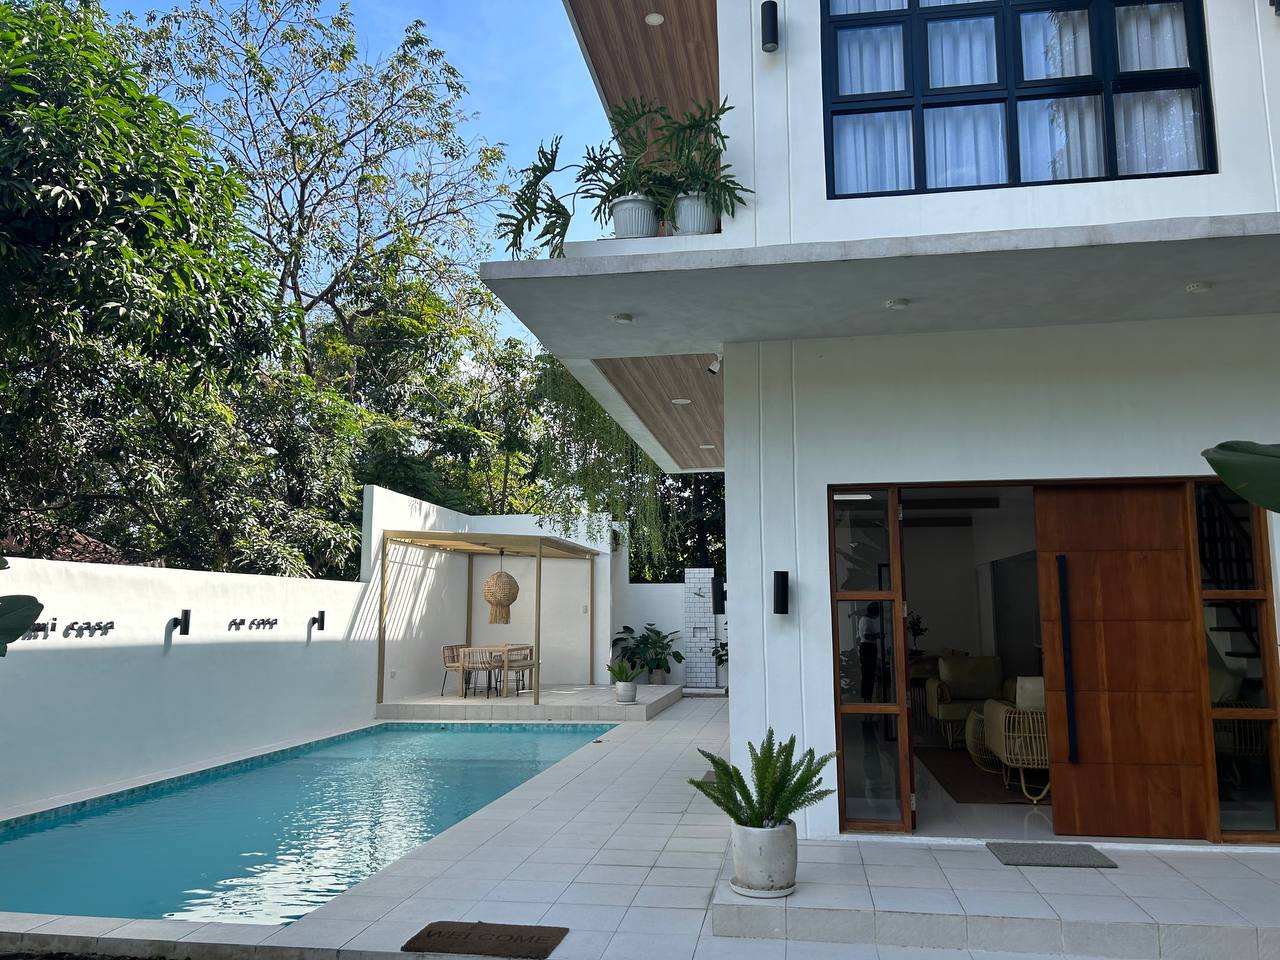 Casa Bisita: A Must-Visit and Instagrammable Modern Tropical Villa in Bulacan